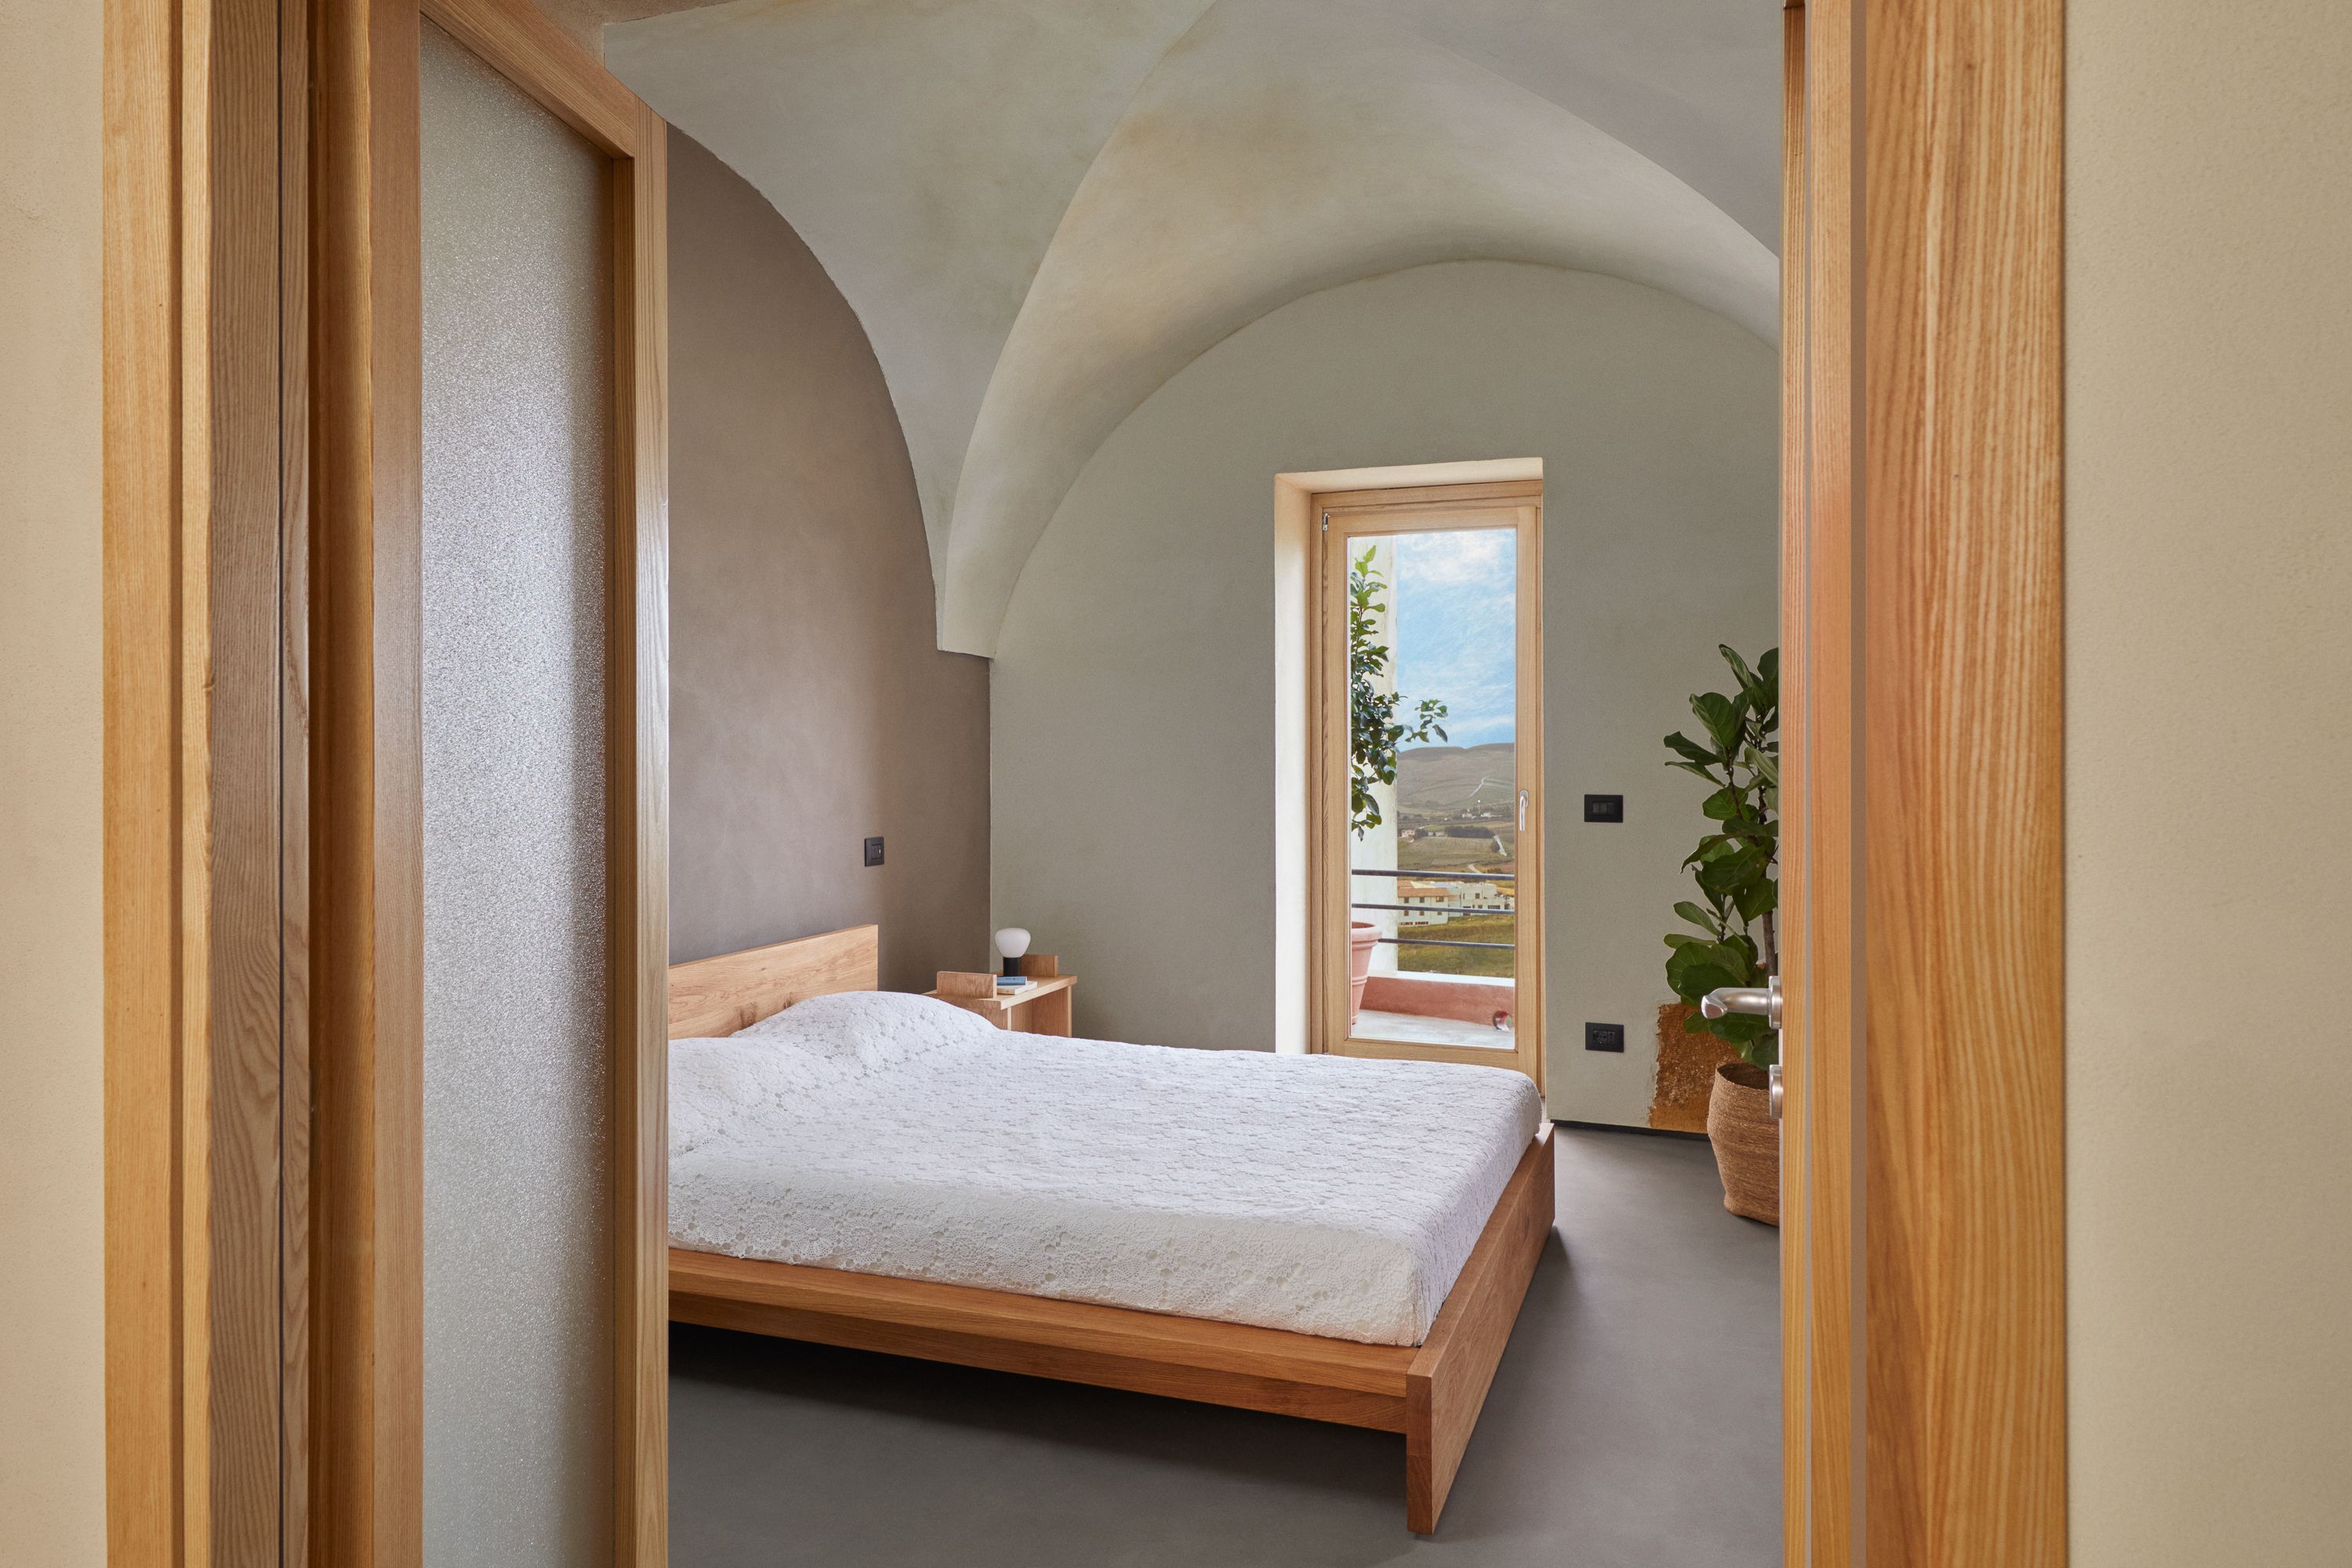 You Can Live in a Restored Sicilian Home Rent-Free, Thanks to Airbnb